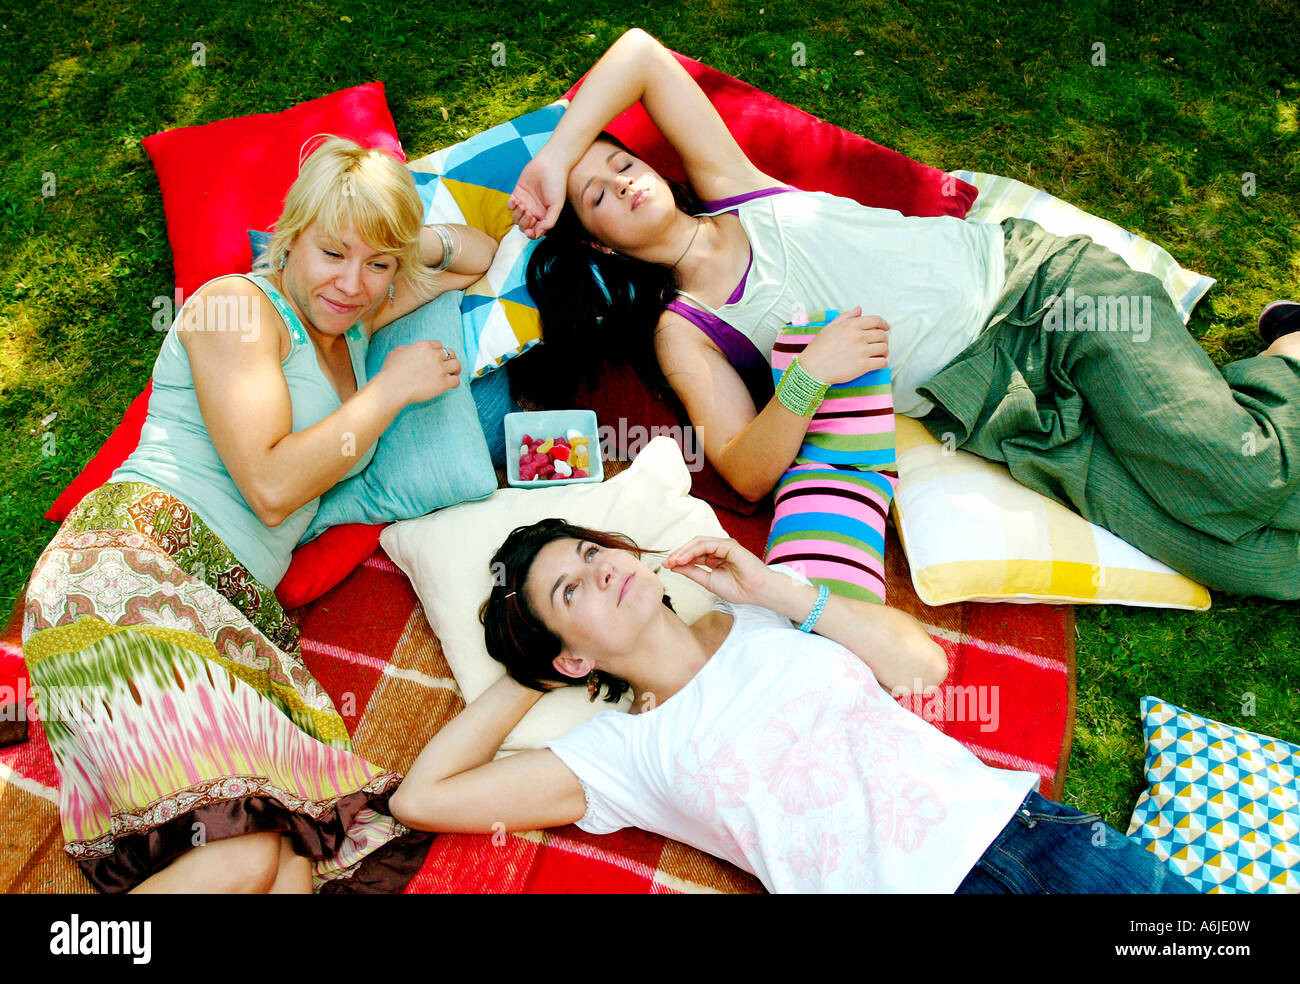 Young women lying on pillows in a garden Stock Photo